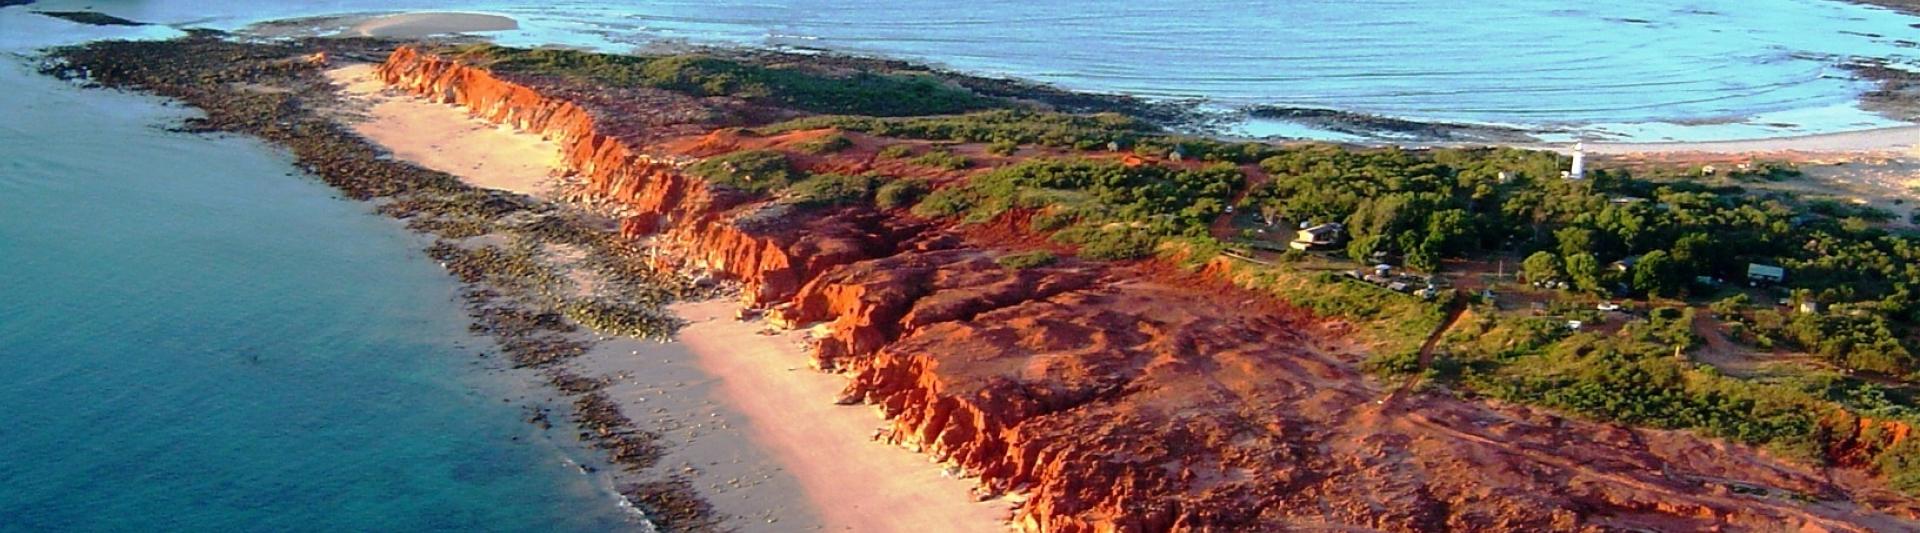 22  Cape Leveque From The Air